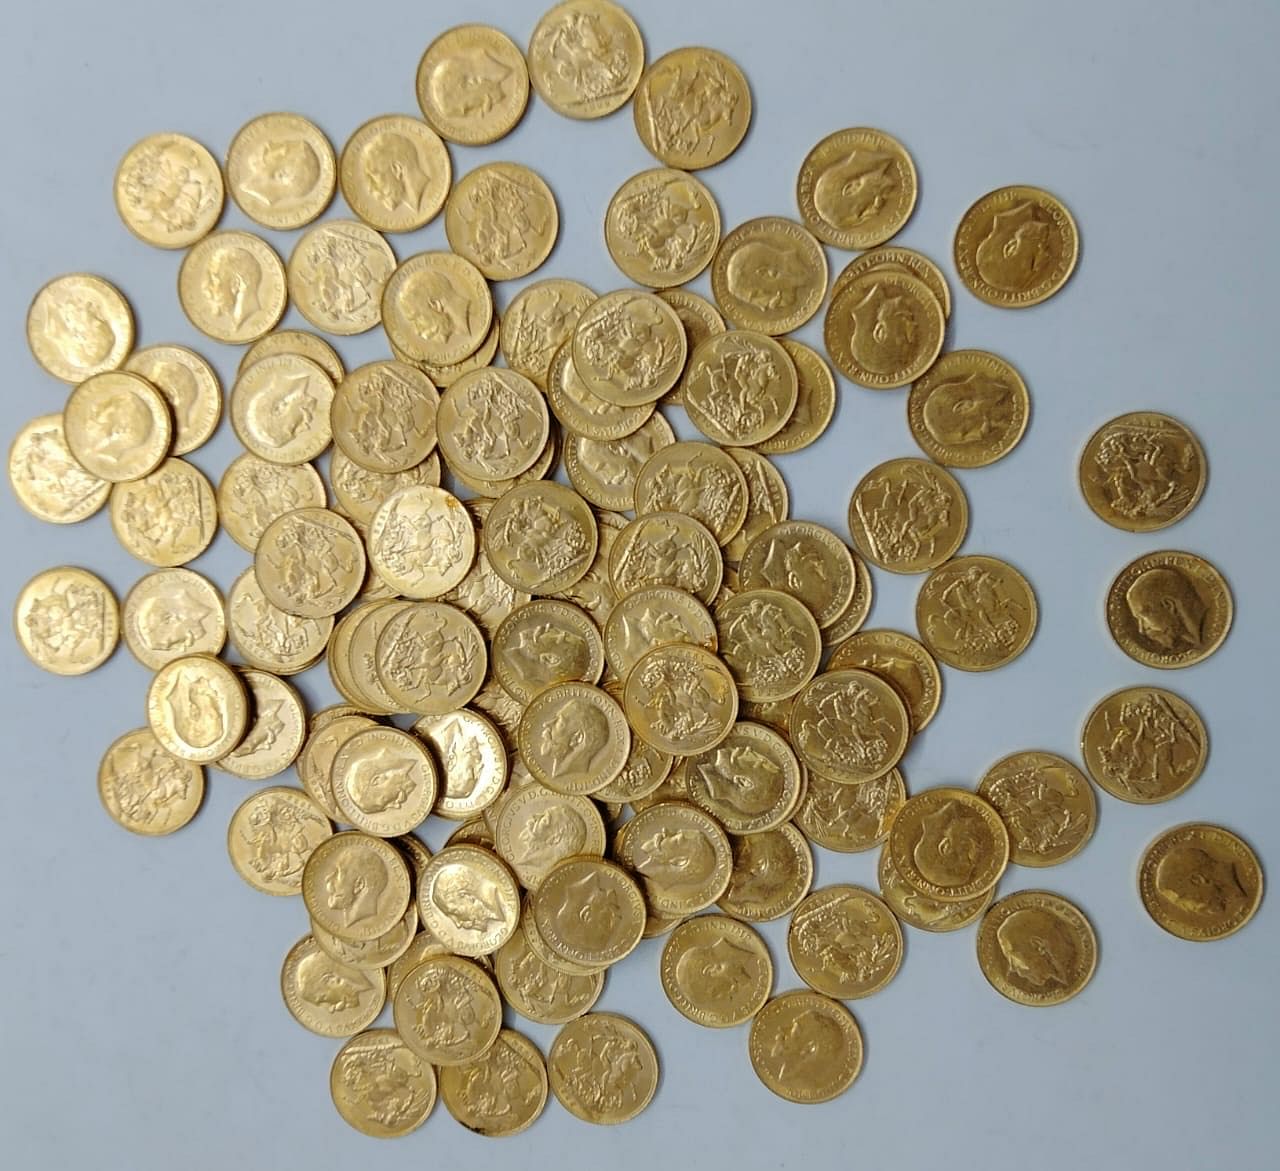 The 240 British-era gold coins are being kept at the Navsari police warehouse in Gujarat | Photo by special arrangement